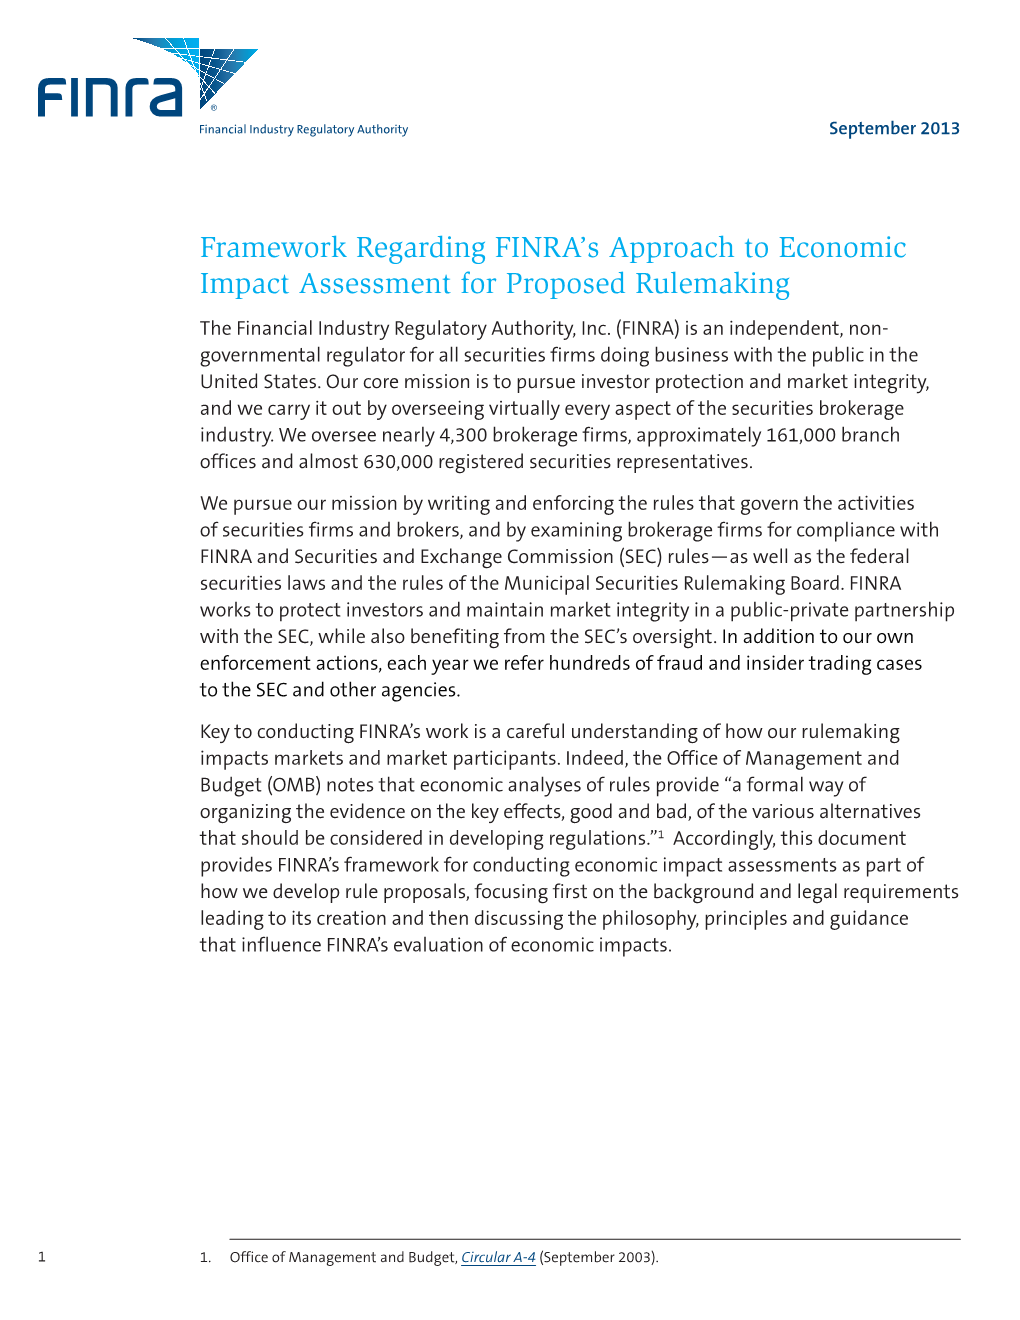 Assess the Economic Impact of Potential Rulemakings